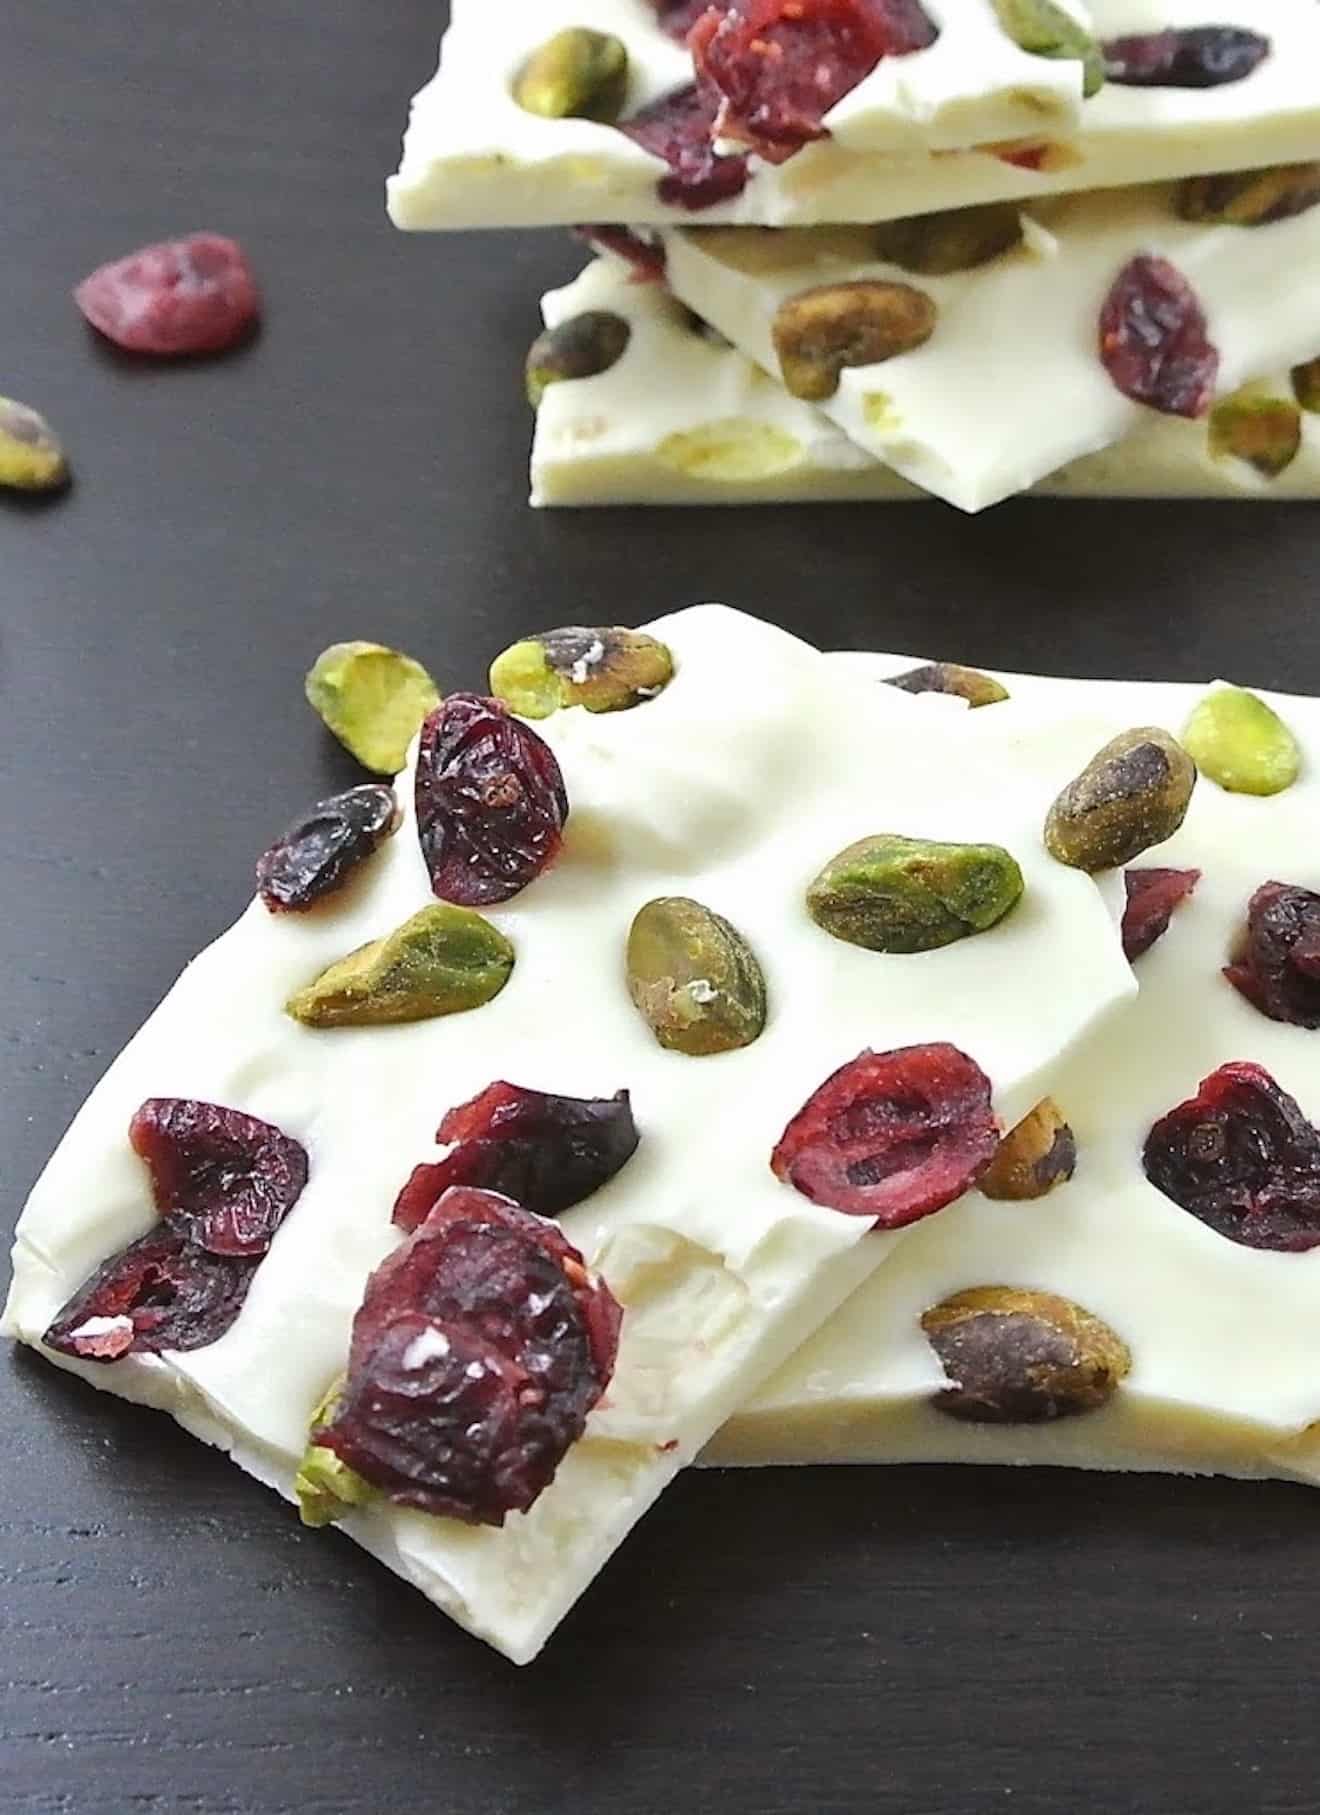 Smooth white chocolate, hardened topped with pistachios and dried cranberries